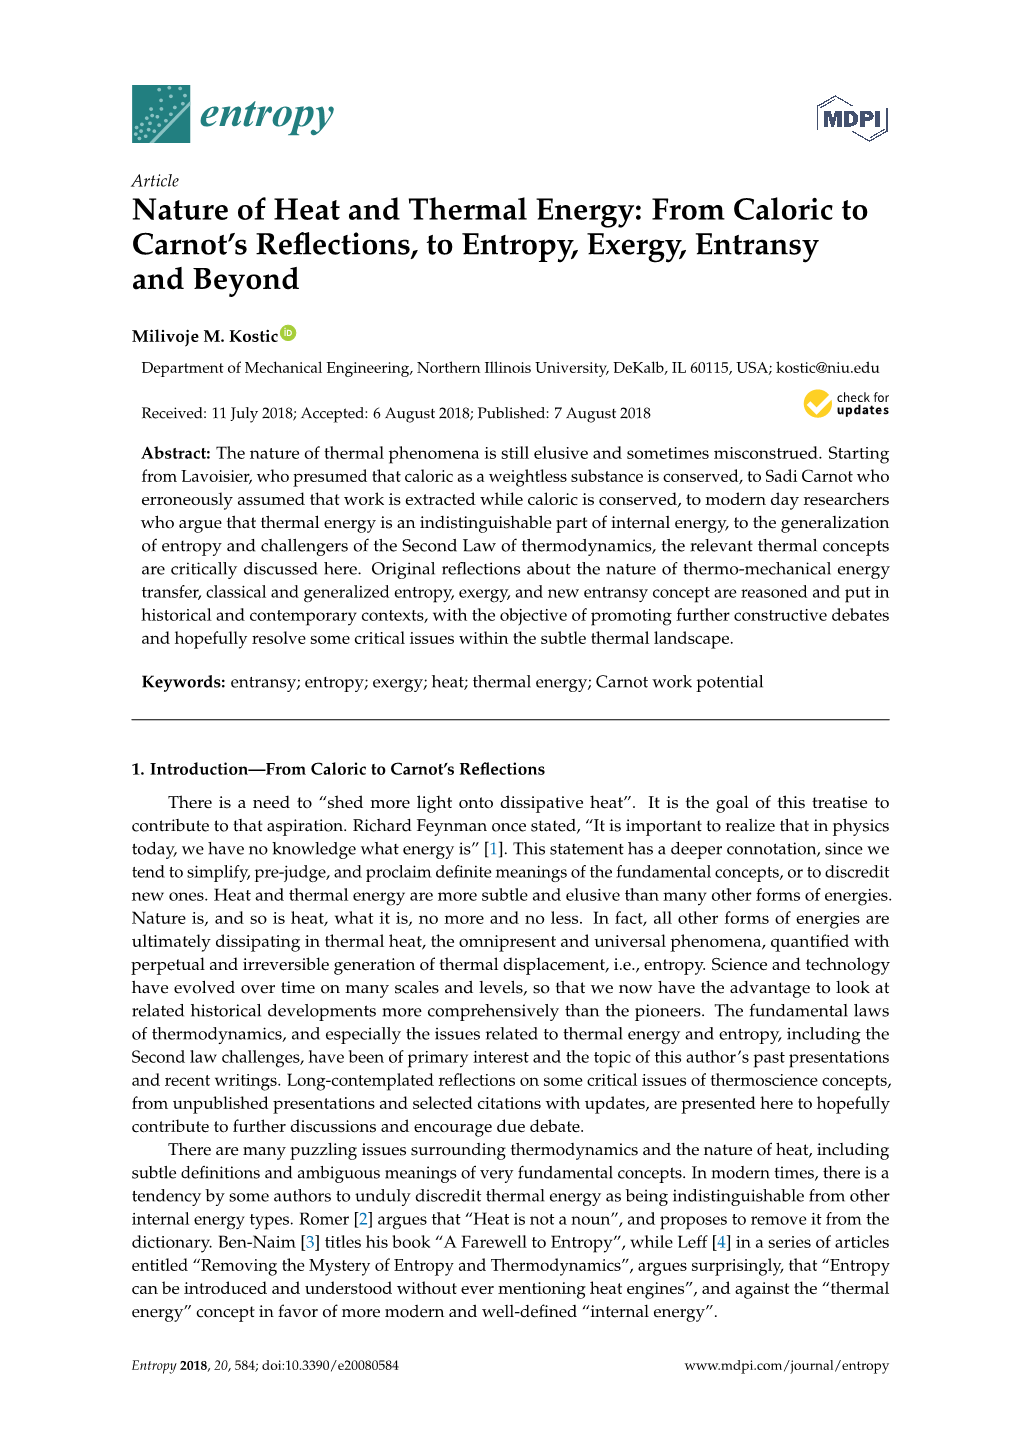 Nature of Heat and Thermal Energy: from Caloric to Carnot's Reflections, to Entropy, Exergy, Entransy and Beyond